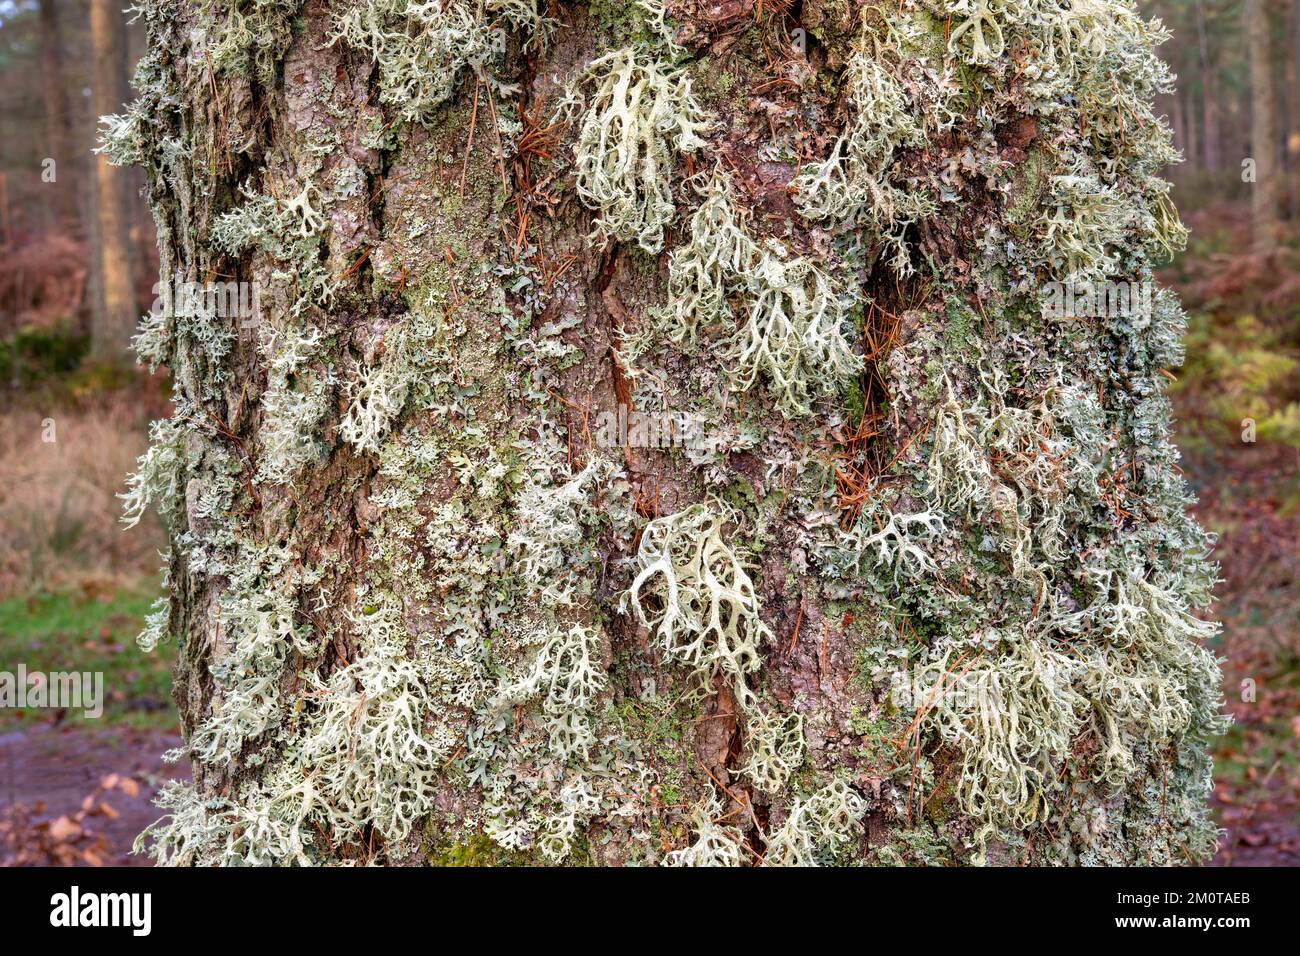 Complex symbiotic relationships on a pine tree  in Beacon Wood, Penrith, Cumbria, UK Stock Photo